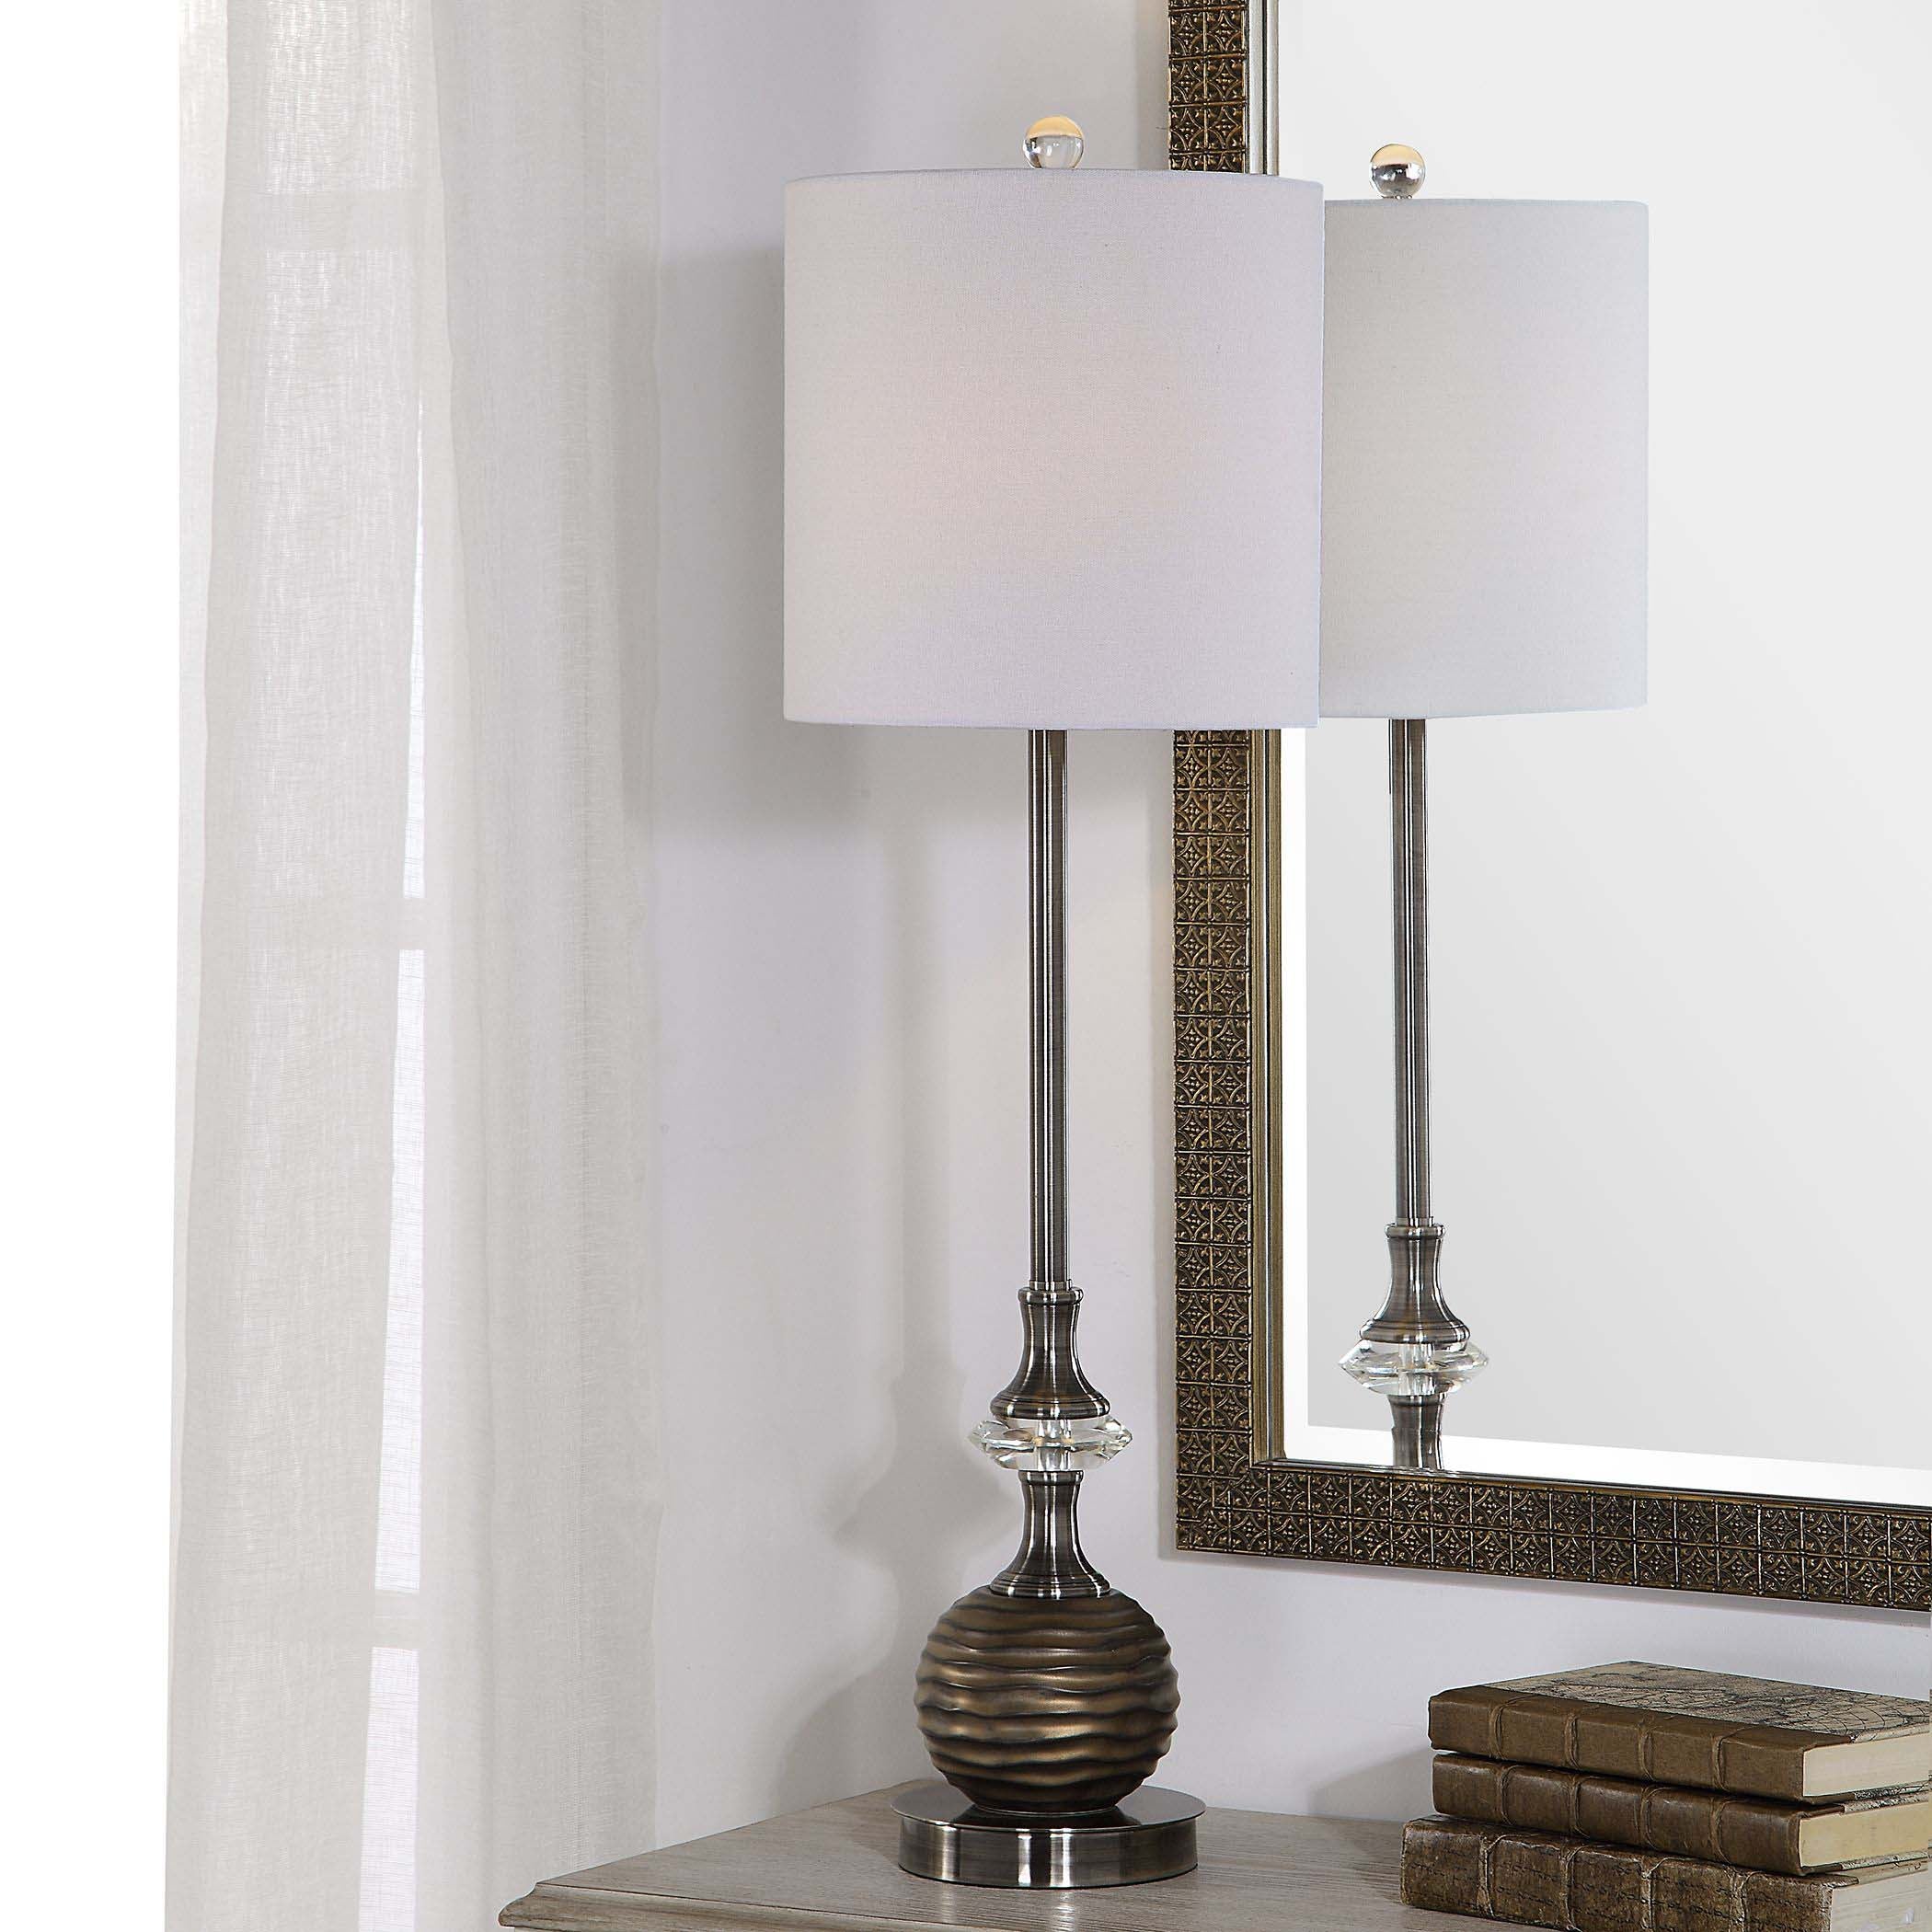 Decor Market Table Lamp Brushed Nickel And Crystal Accents